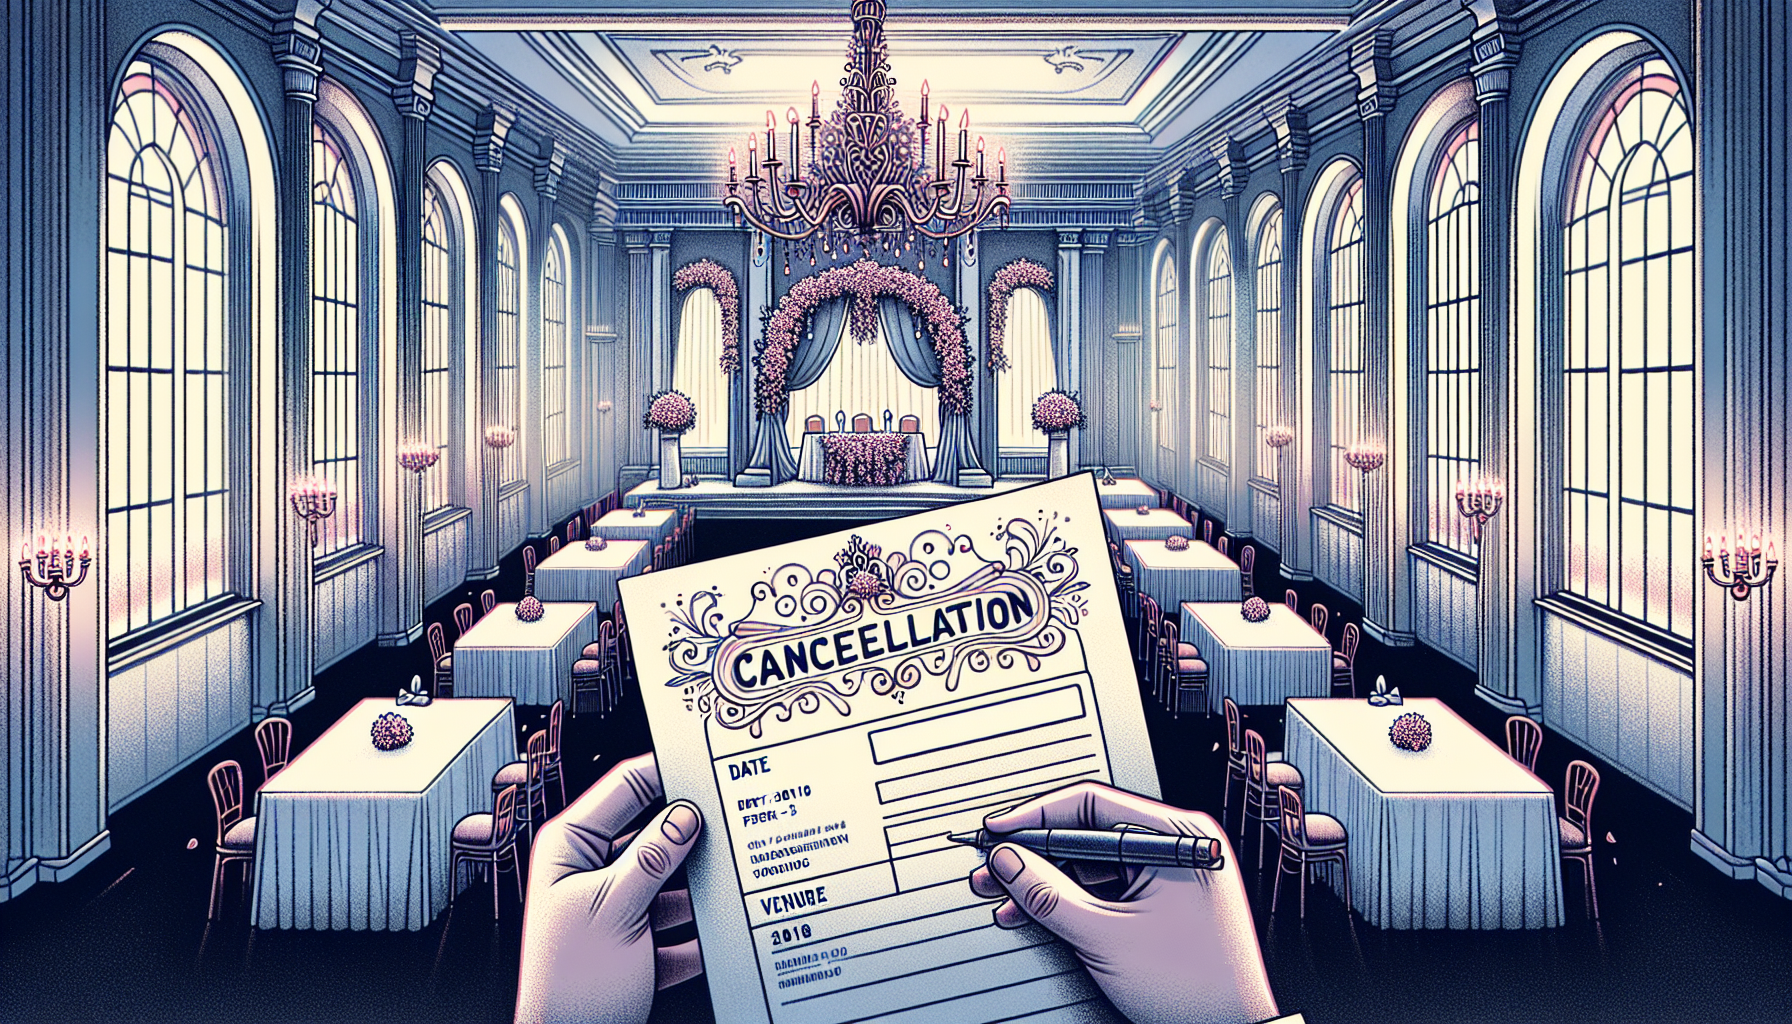 Illustration of a cancellation notice for a wedding event